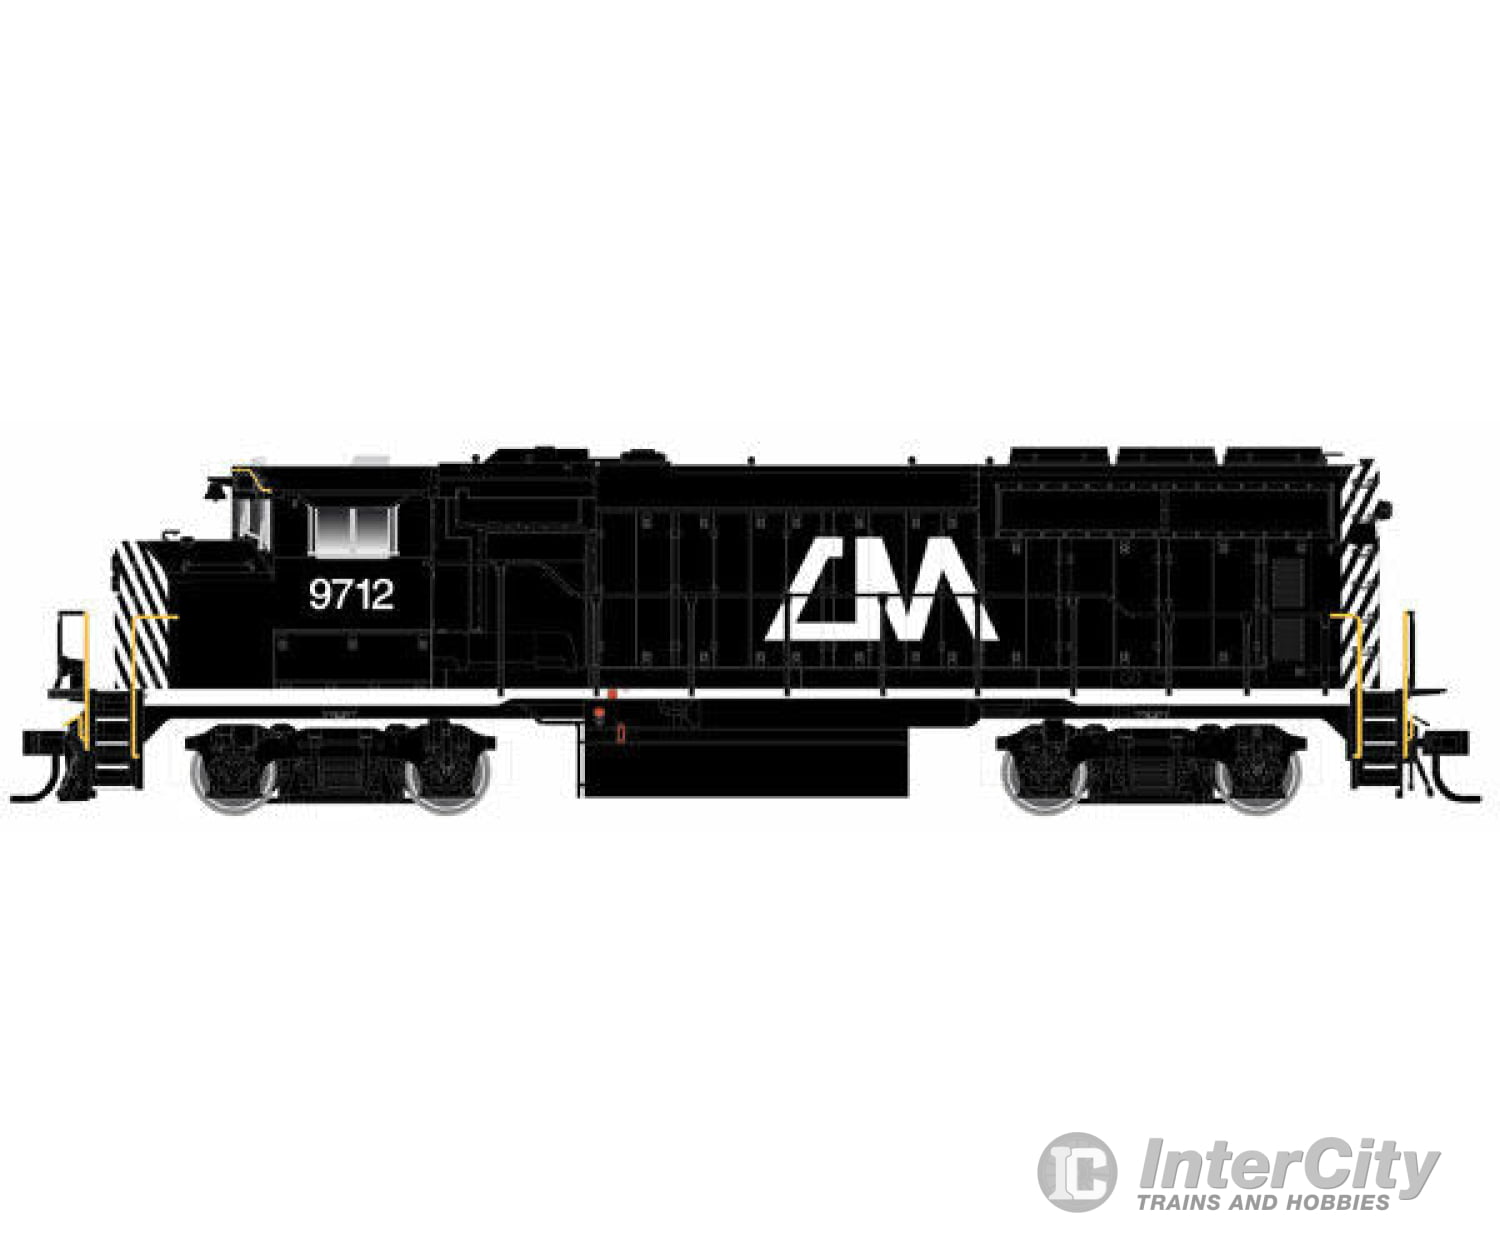 Atlas 10001419 Ho Gmd Gp40-2W Cn Late Version W/Sound & Dcc - Master Series Gold -- Central Michigan